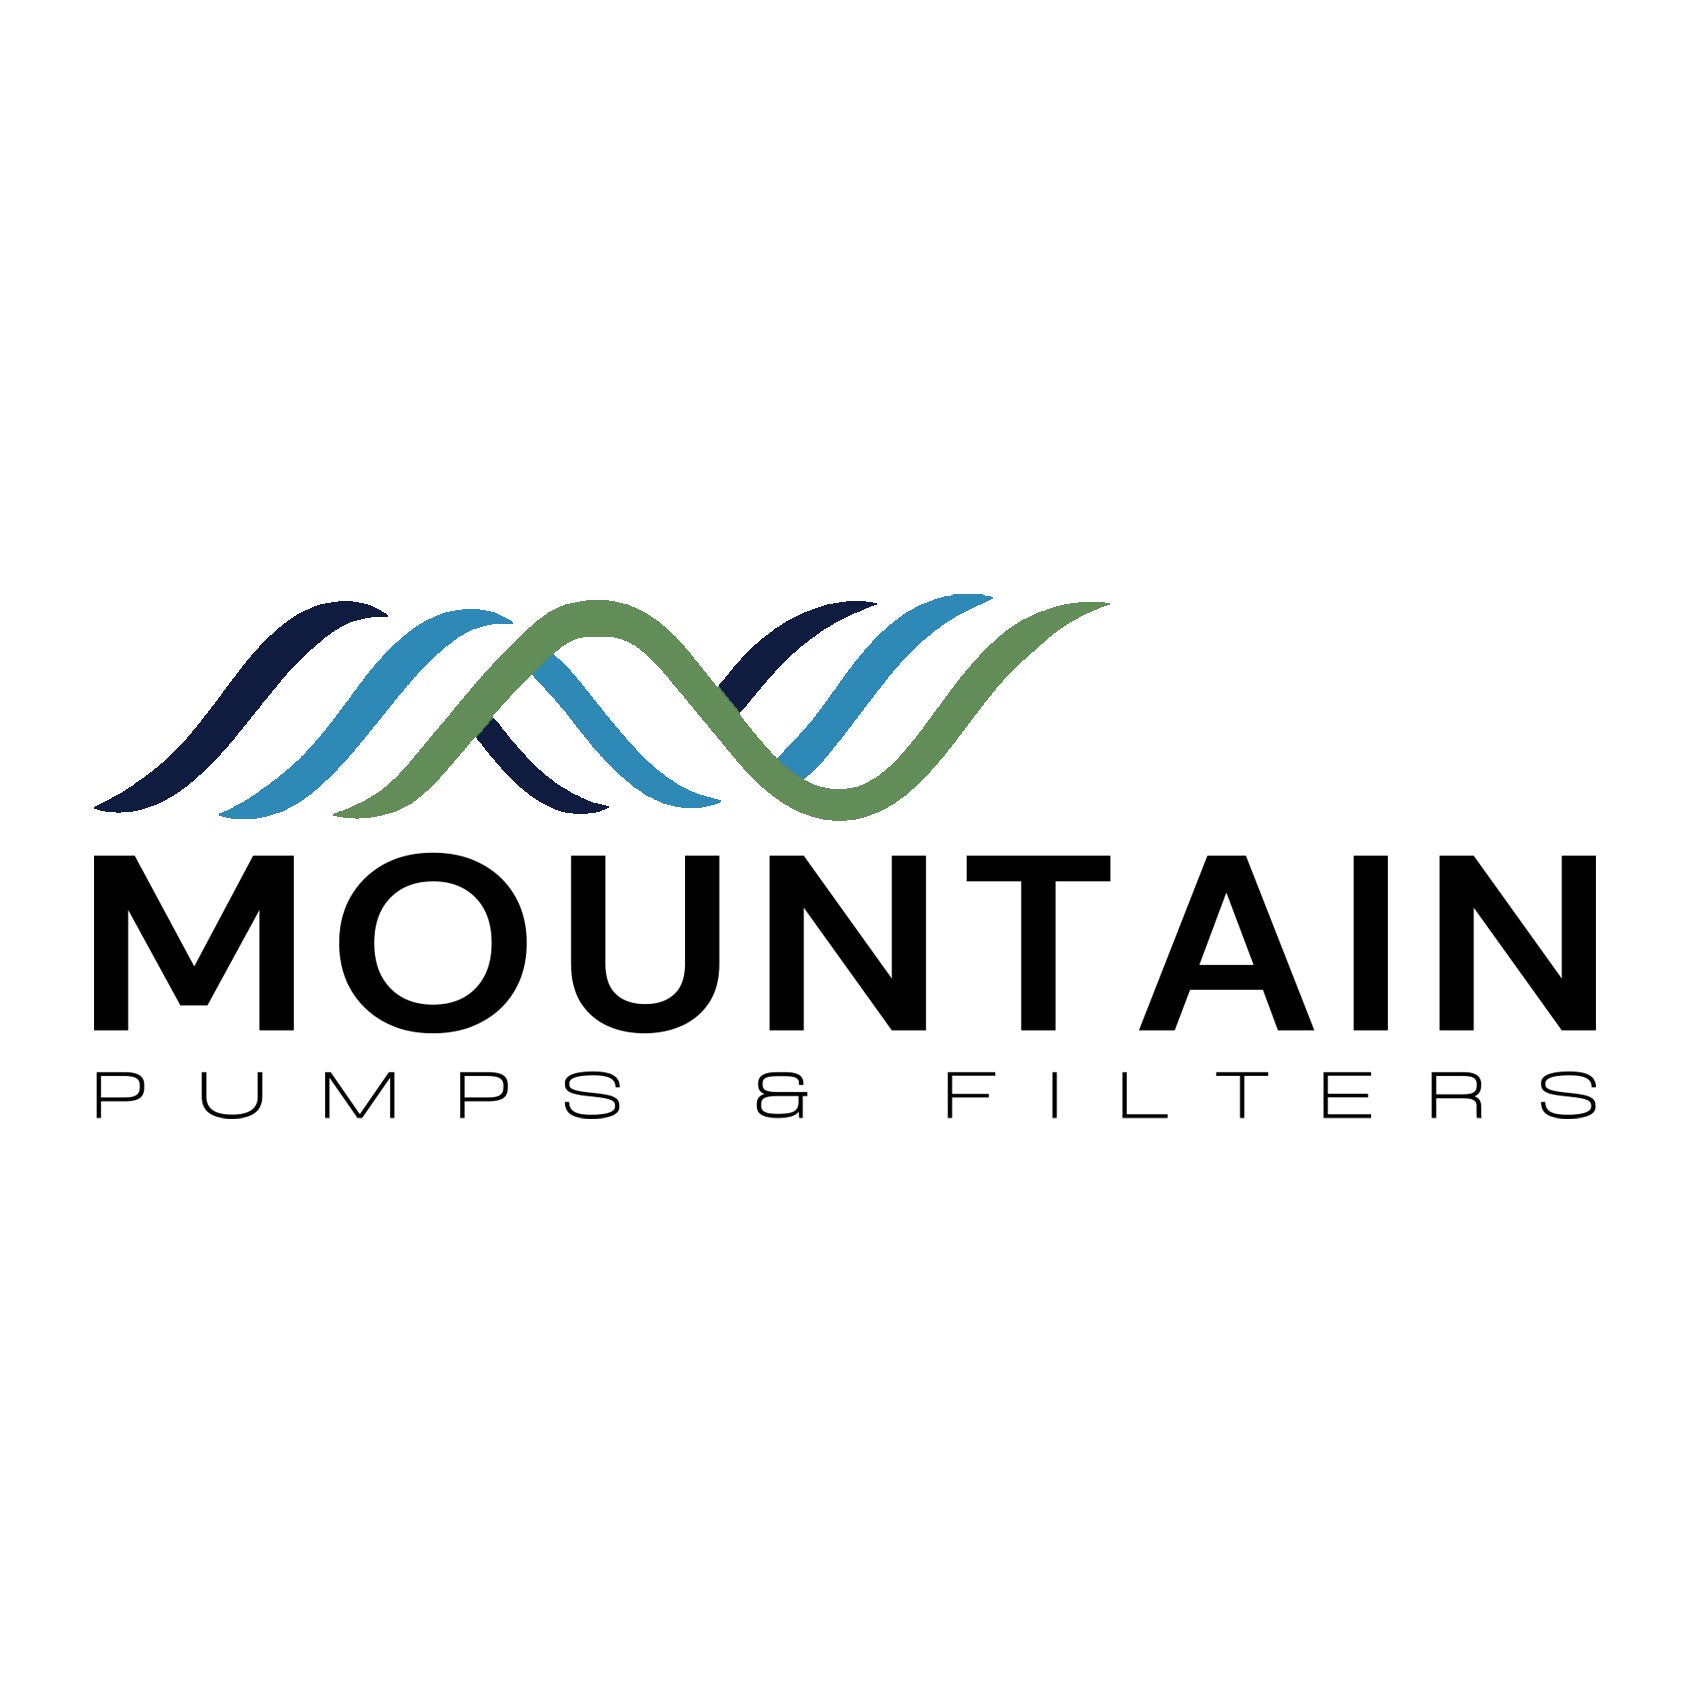 Mountain Pumps & Filters